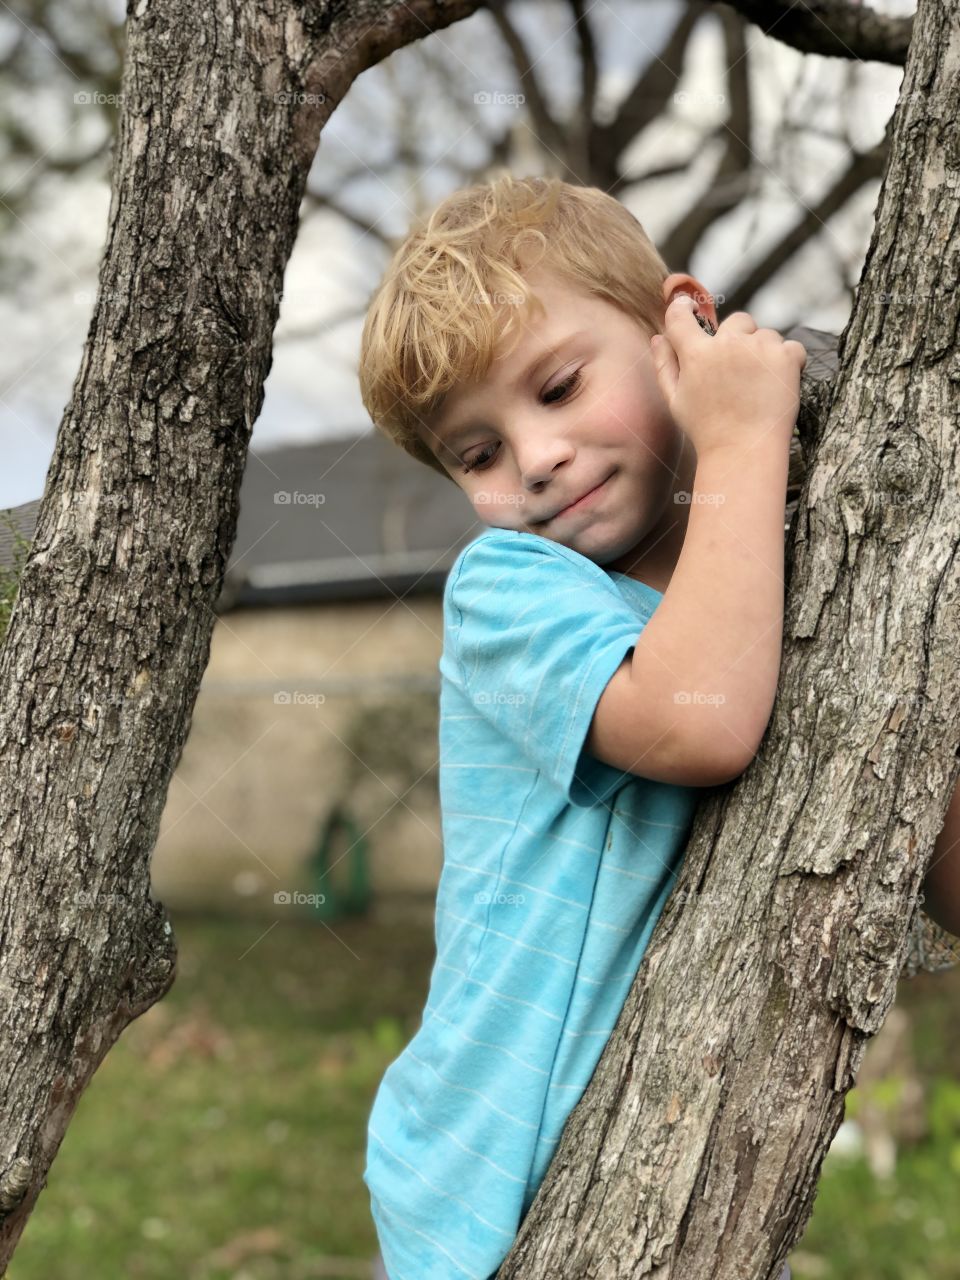 My nephew in our pear tree